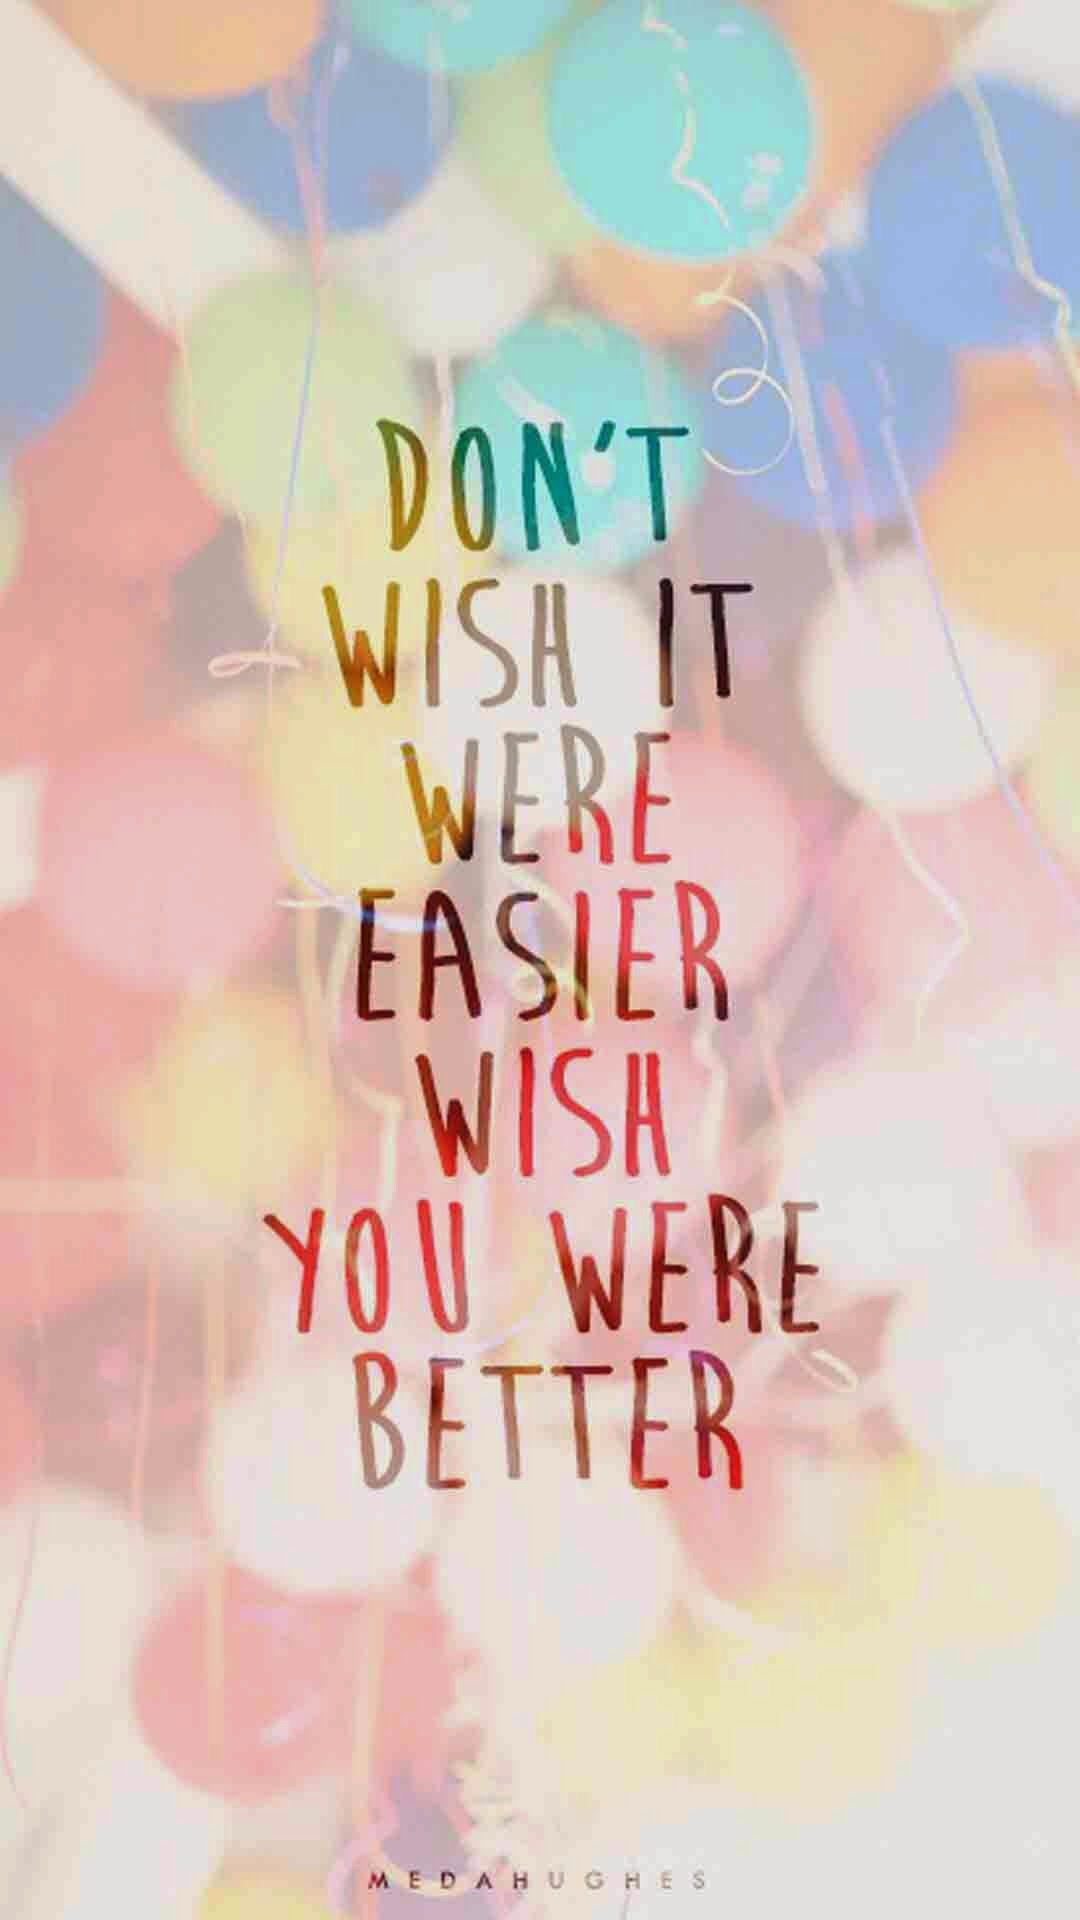 Tap image for more quote wallpaper! Wish You Were Better - iPhone 6 quotes wallp. Life quotes wallpaper, Inspiring quotes about life, Wallpaper quotes